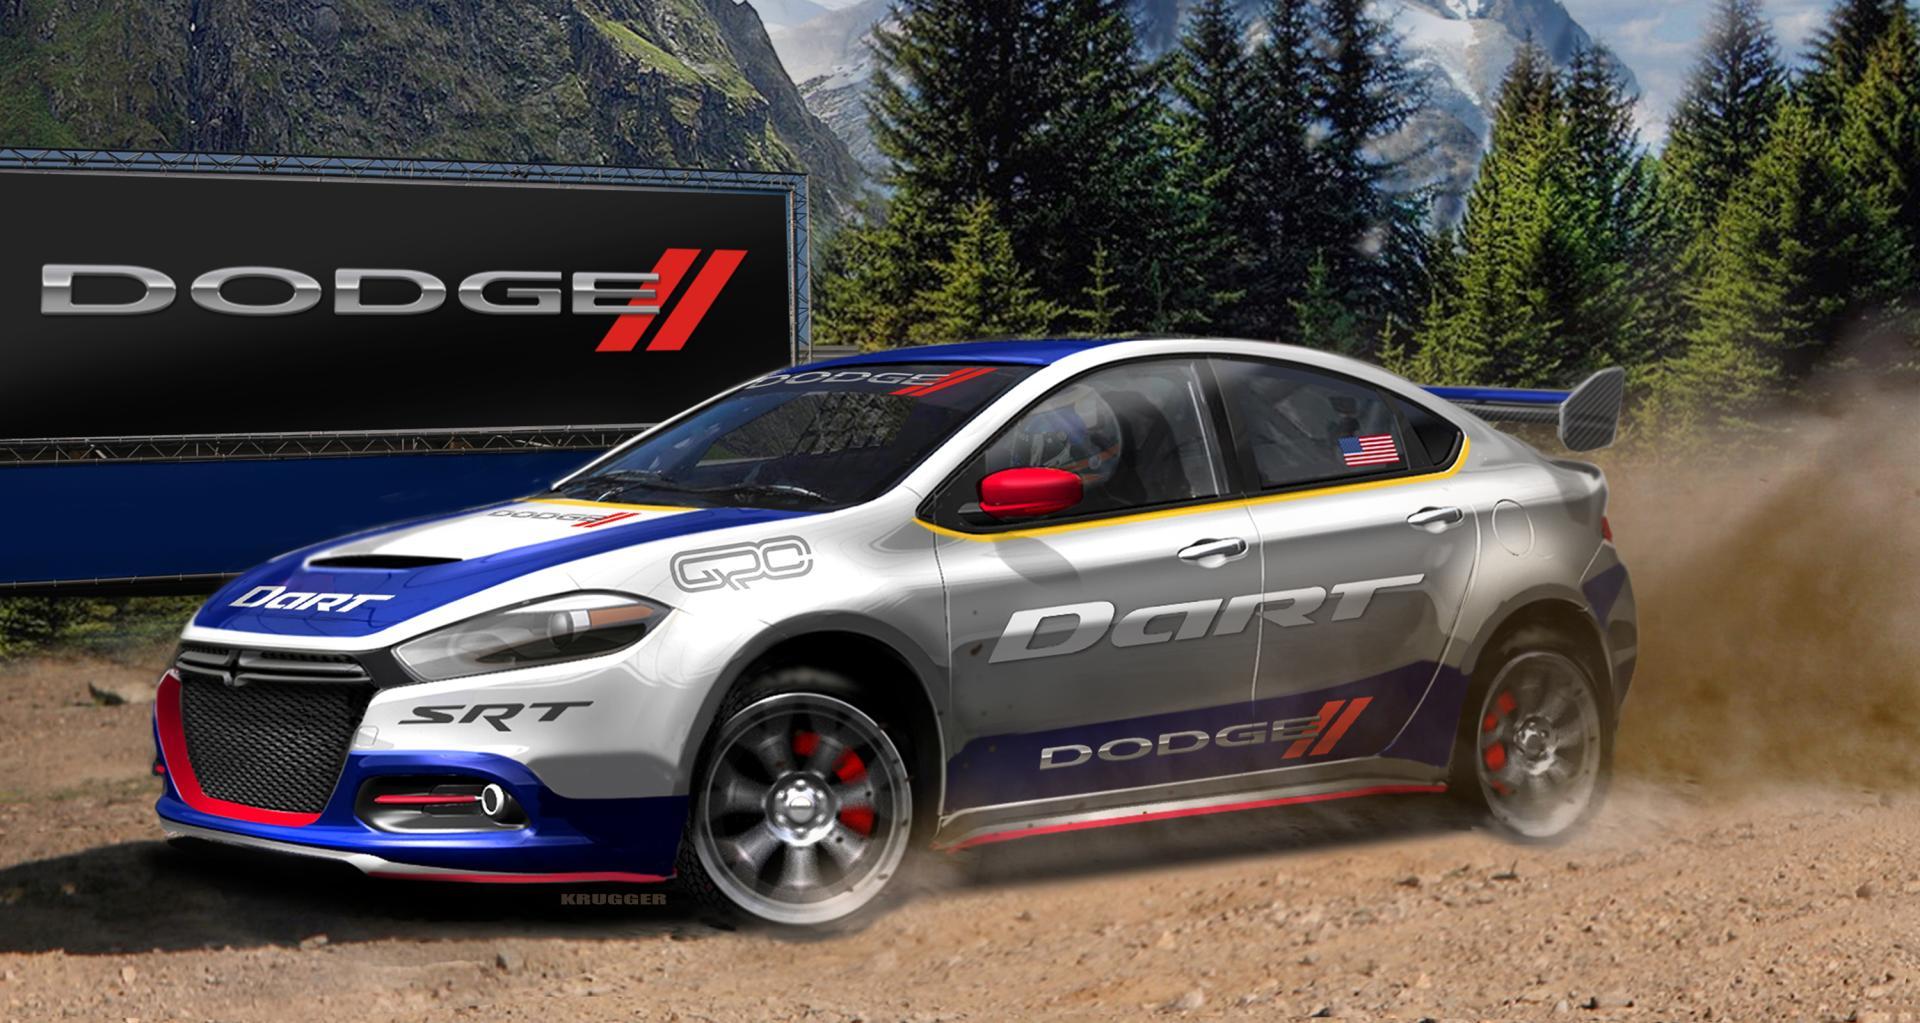 Dodge Dart Rally Car Wallpaper and Image Gallery